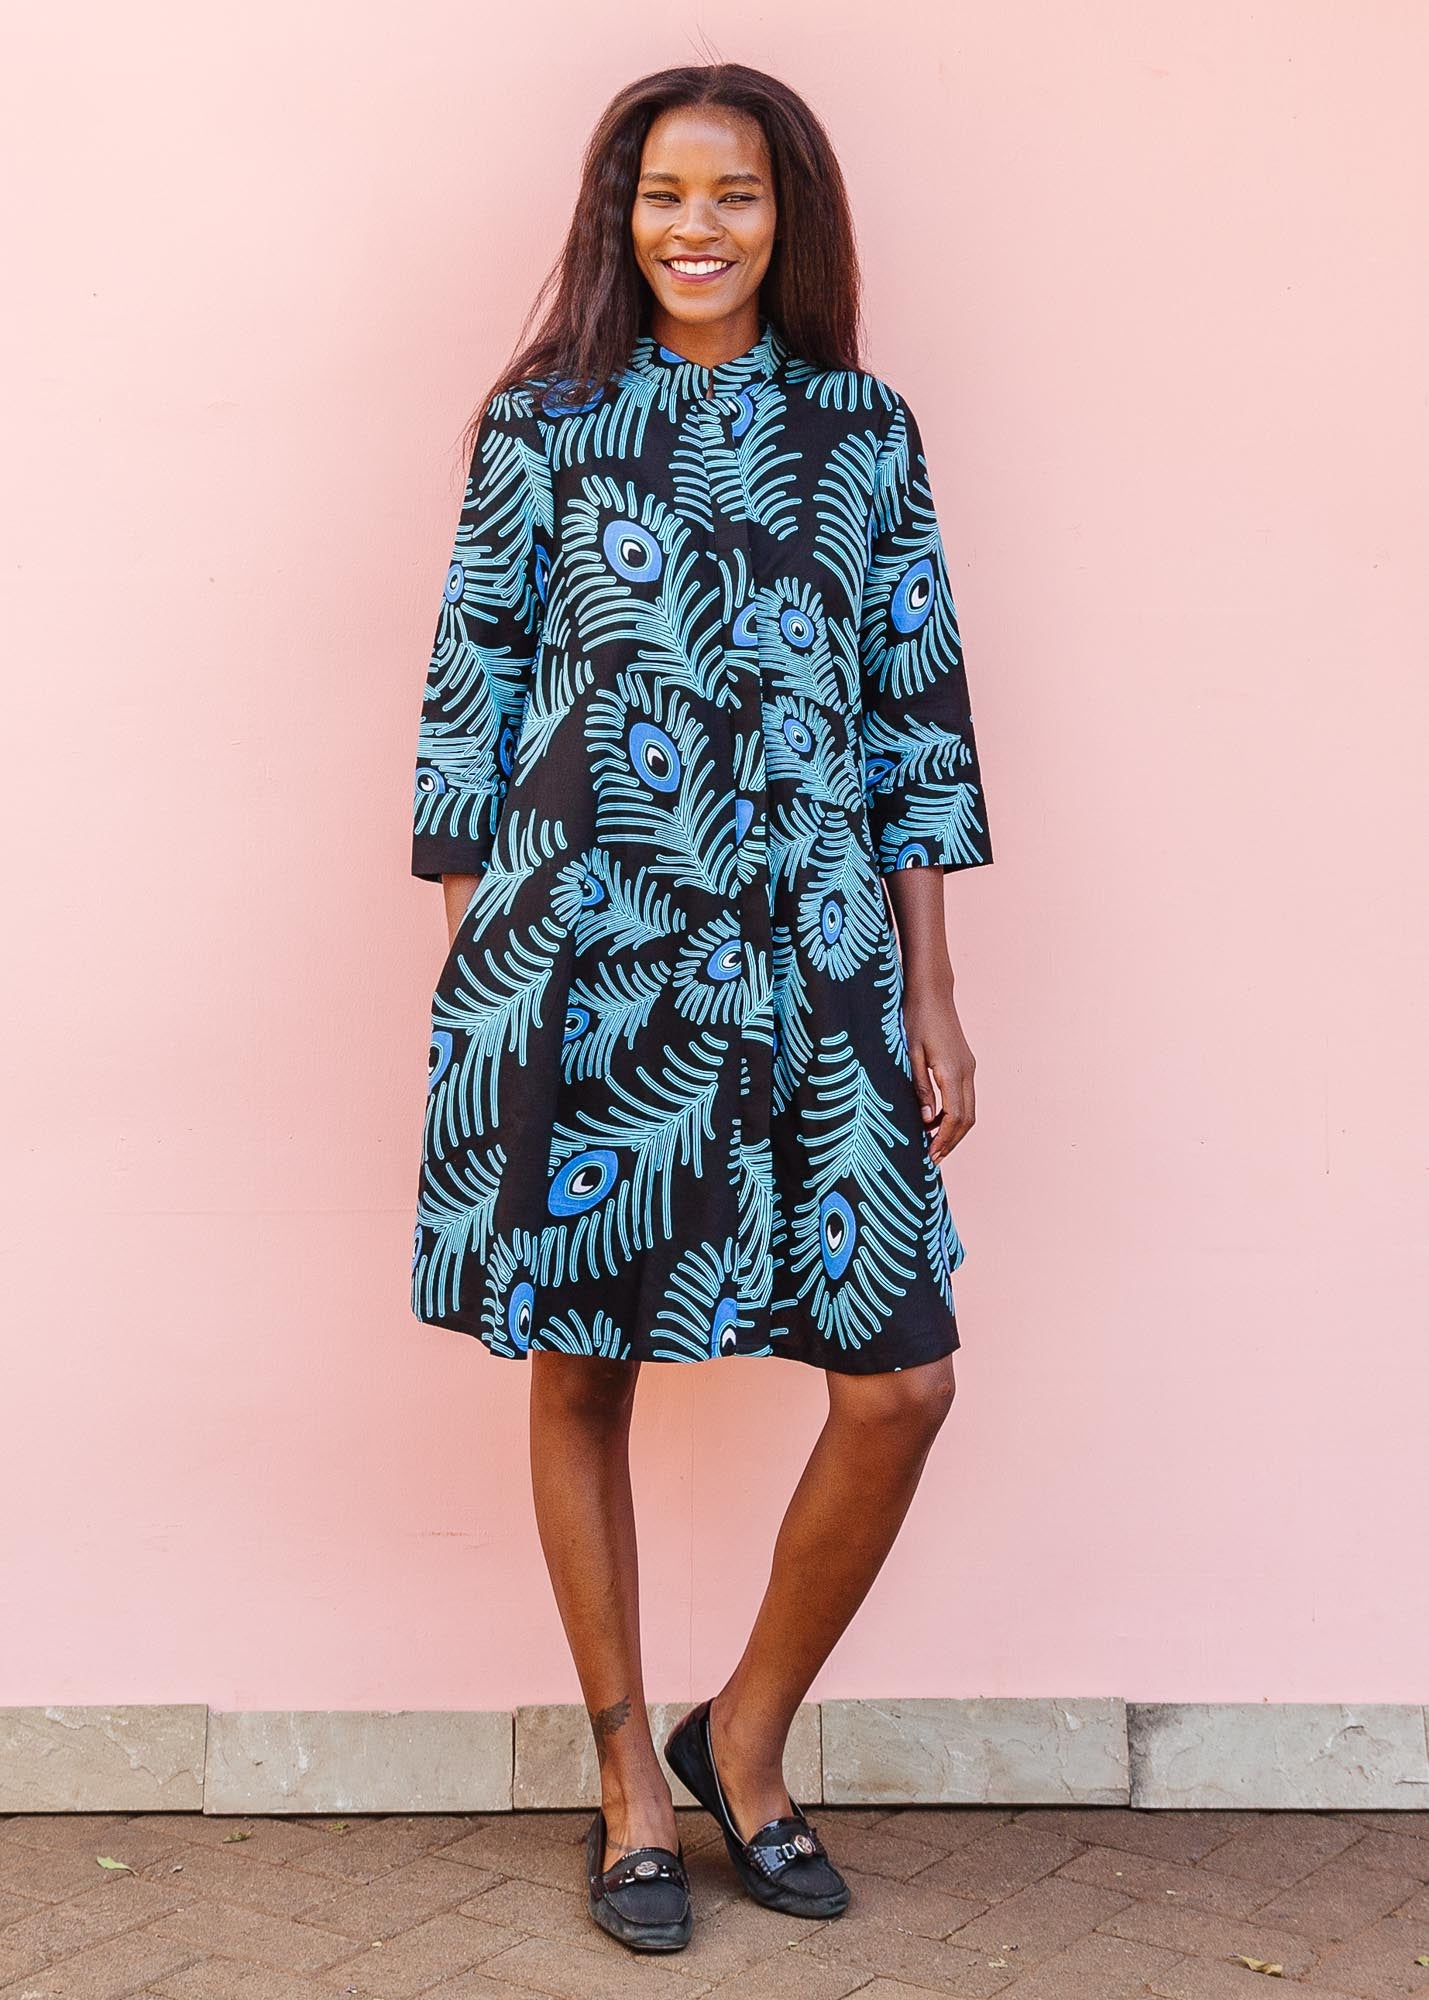 The model is wearing a black dress with blue, white and turquoise peacock feather design print   